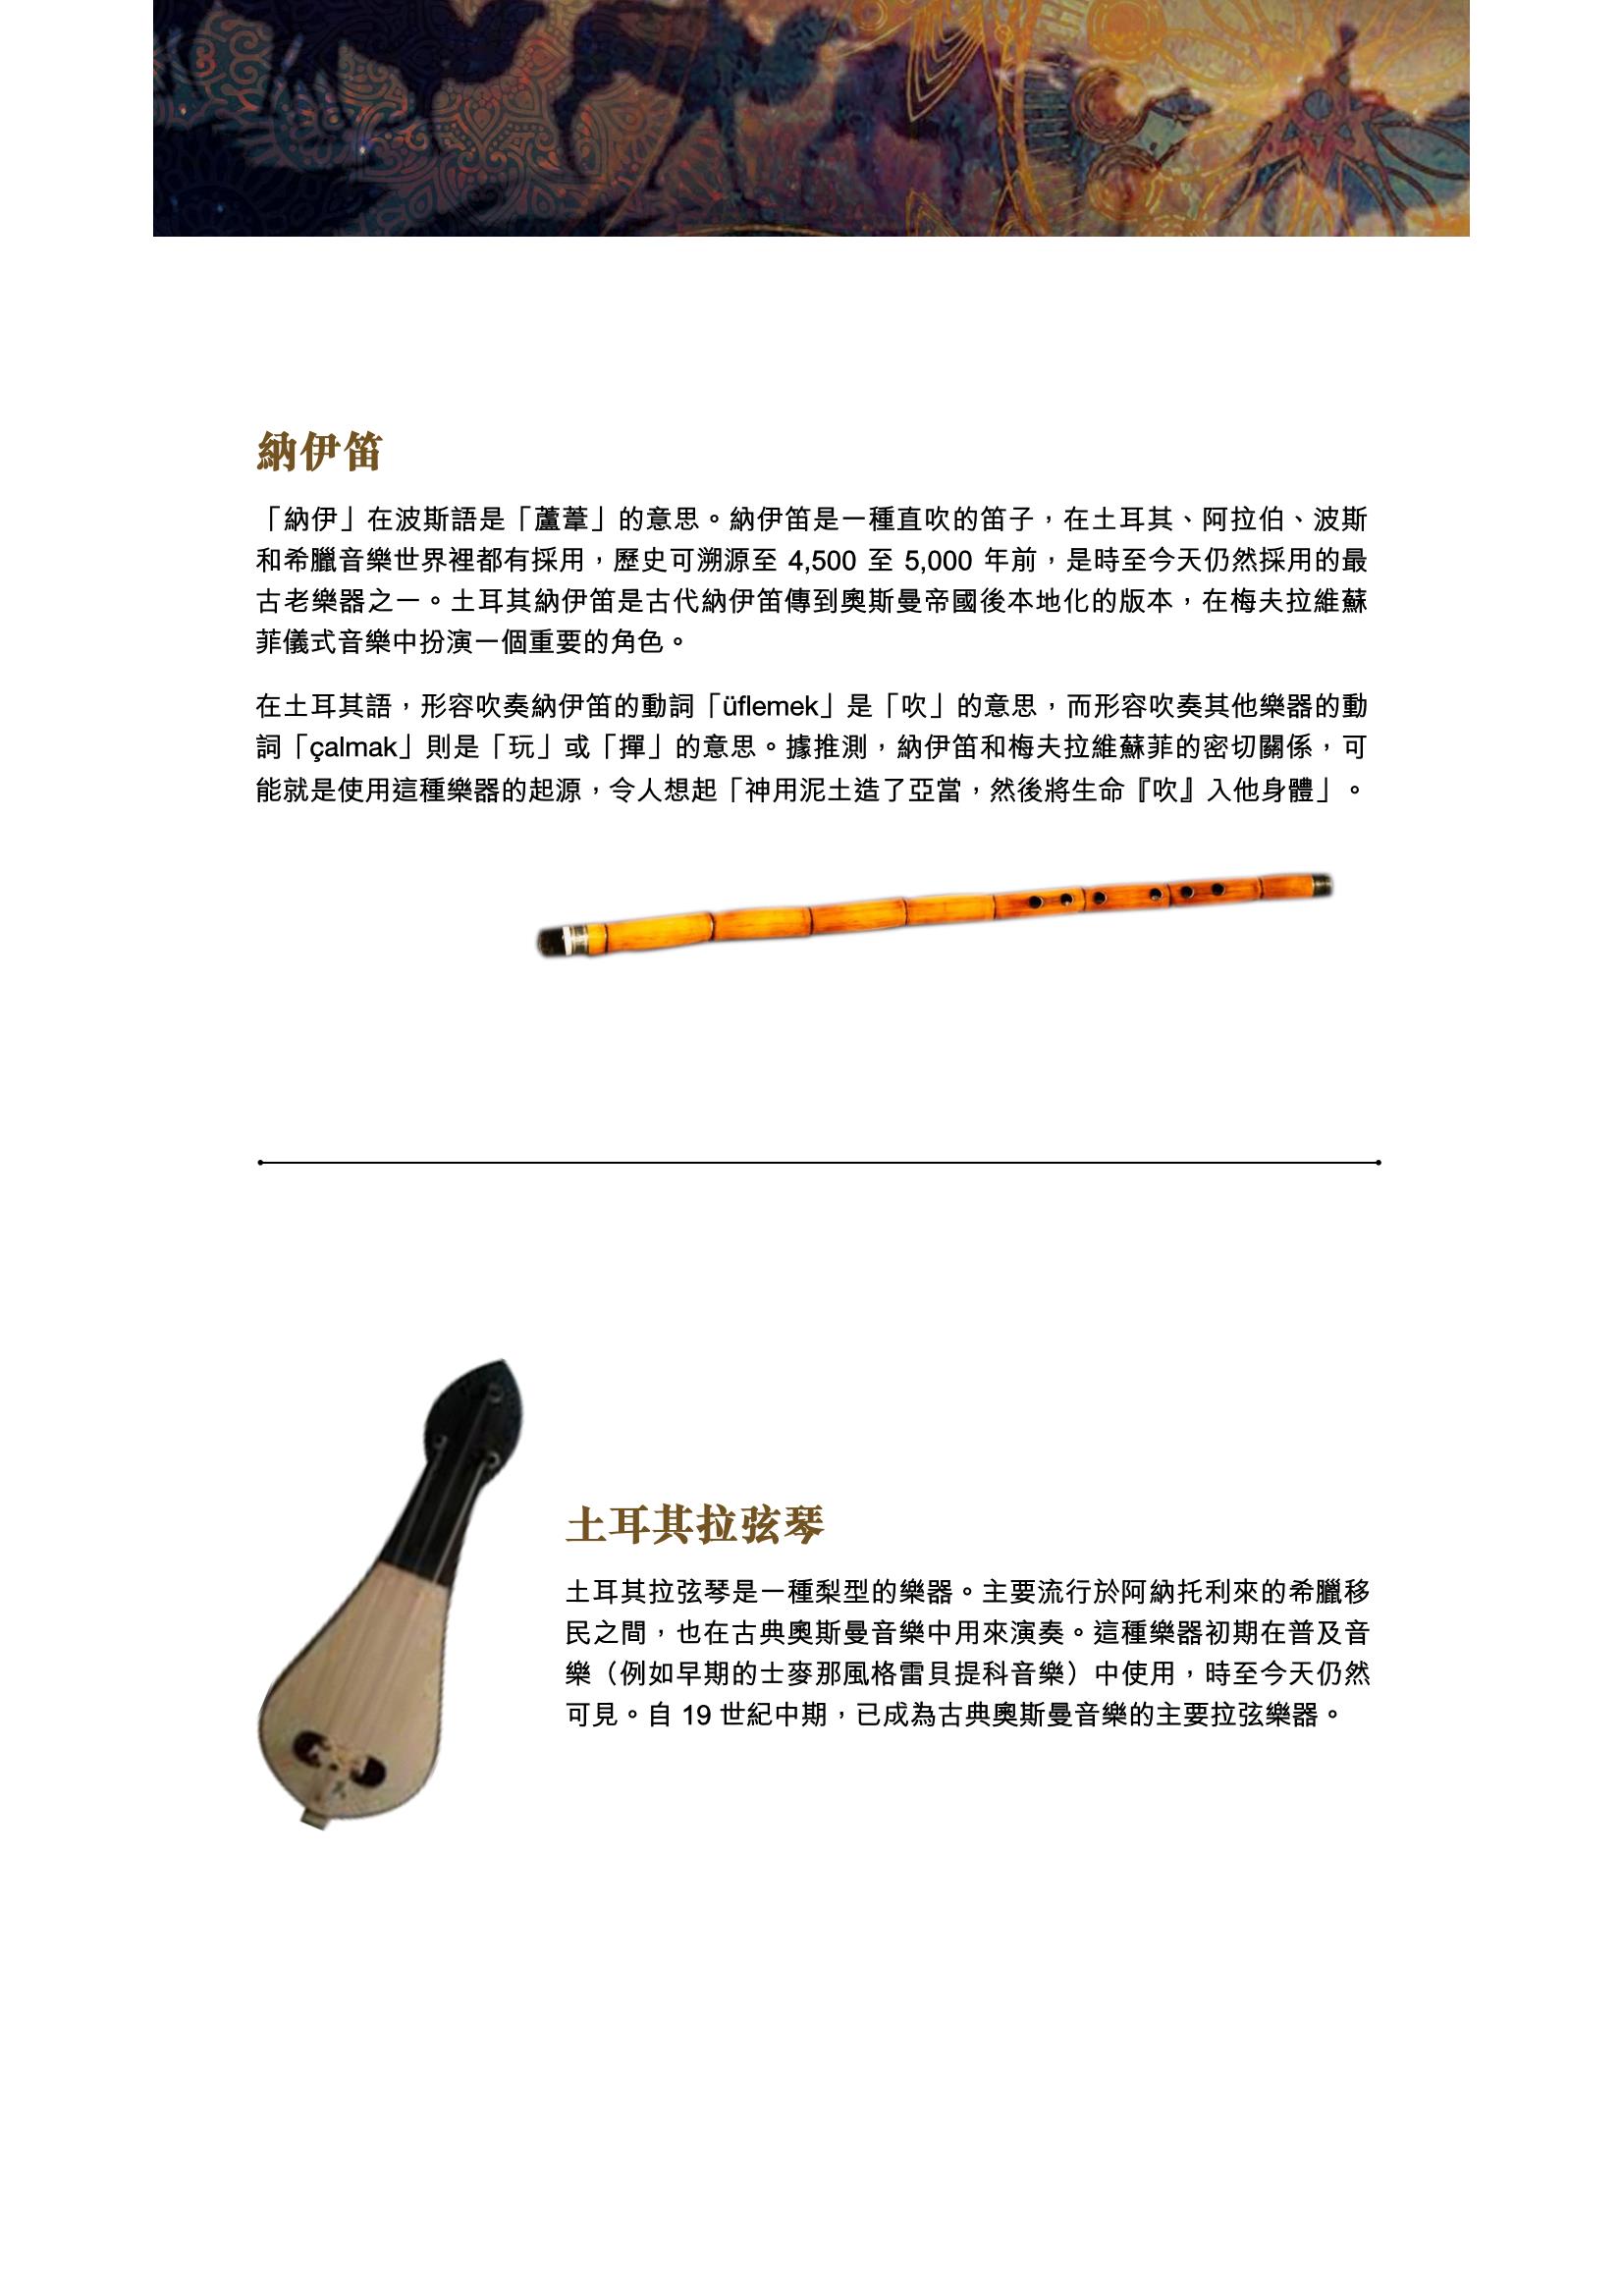 Chinese Instruments Introduction